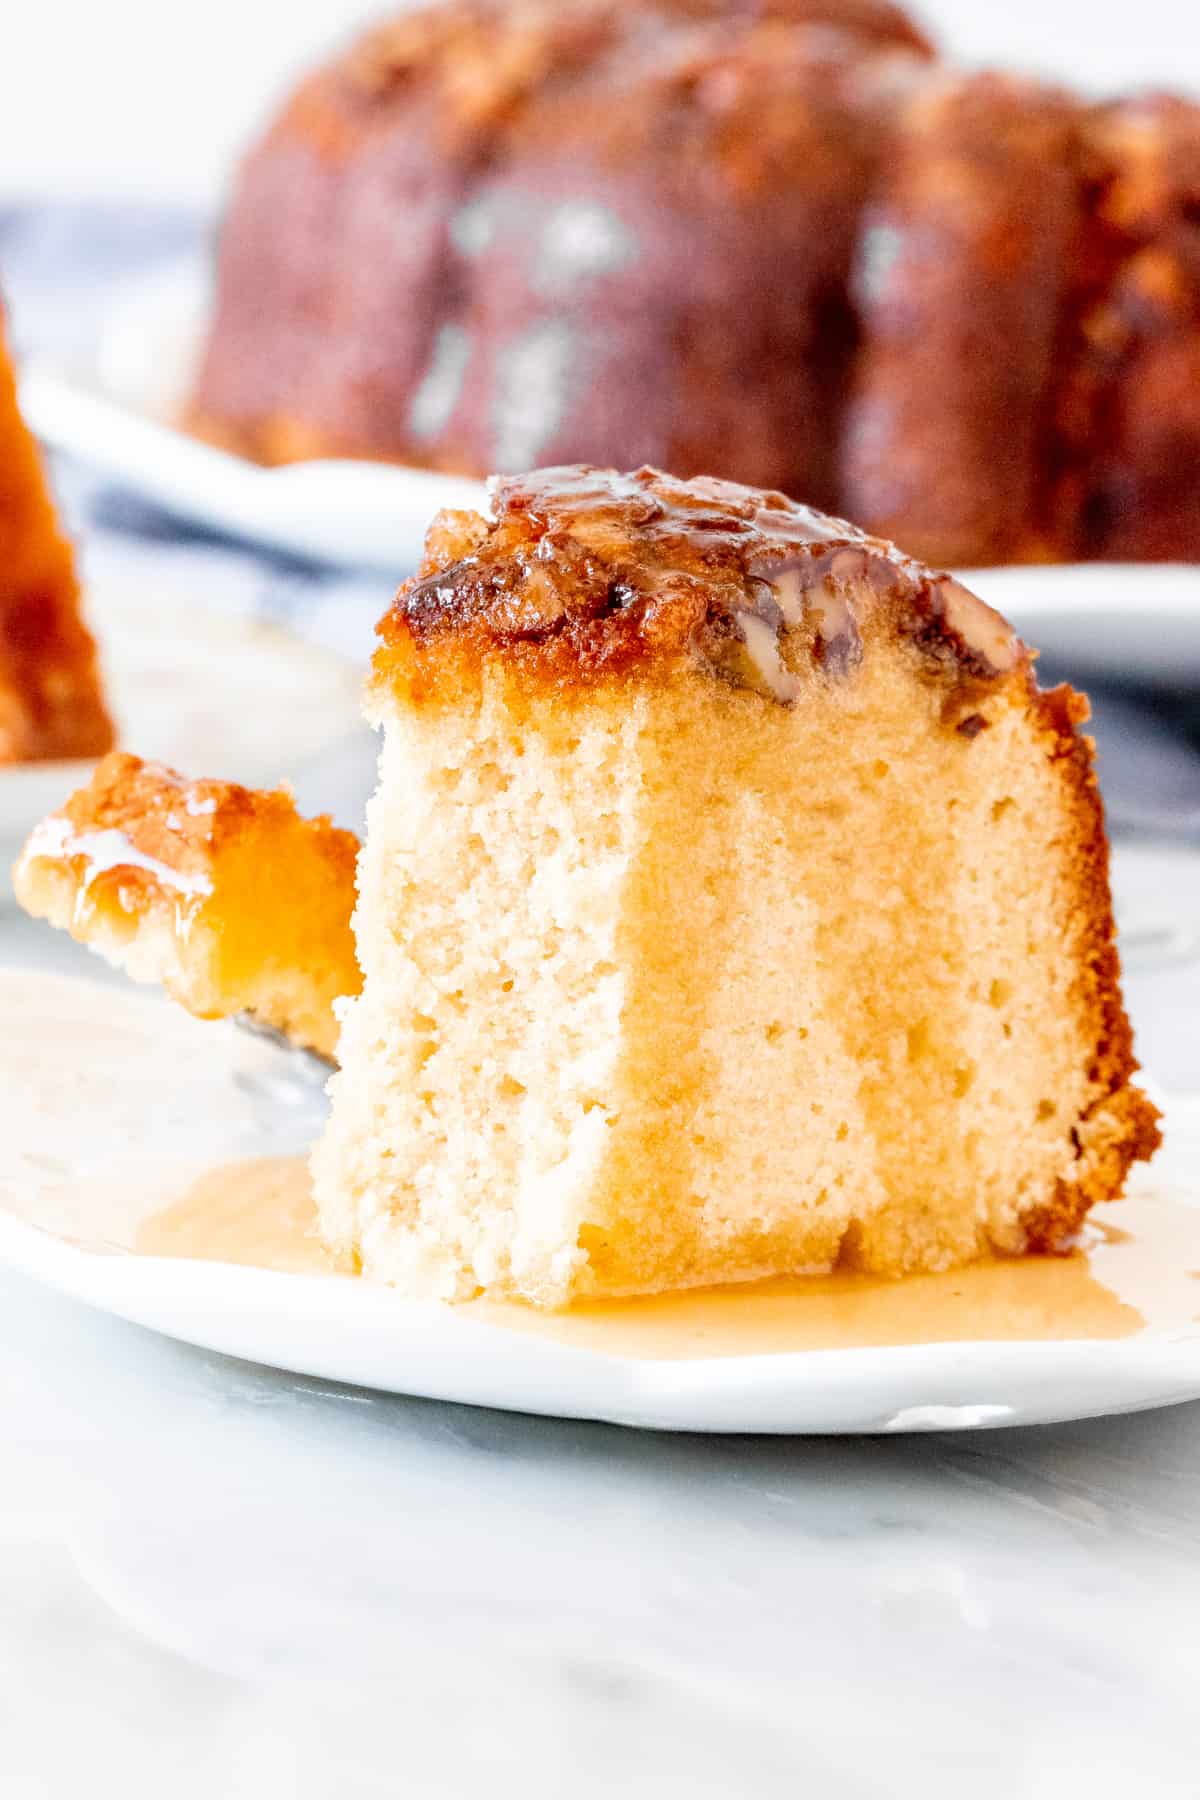 Piece of bunt cake with nuts on top and rum sauce poured over top.